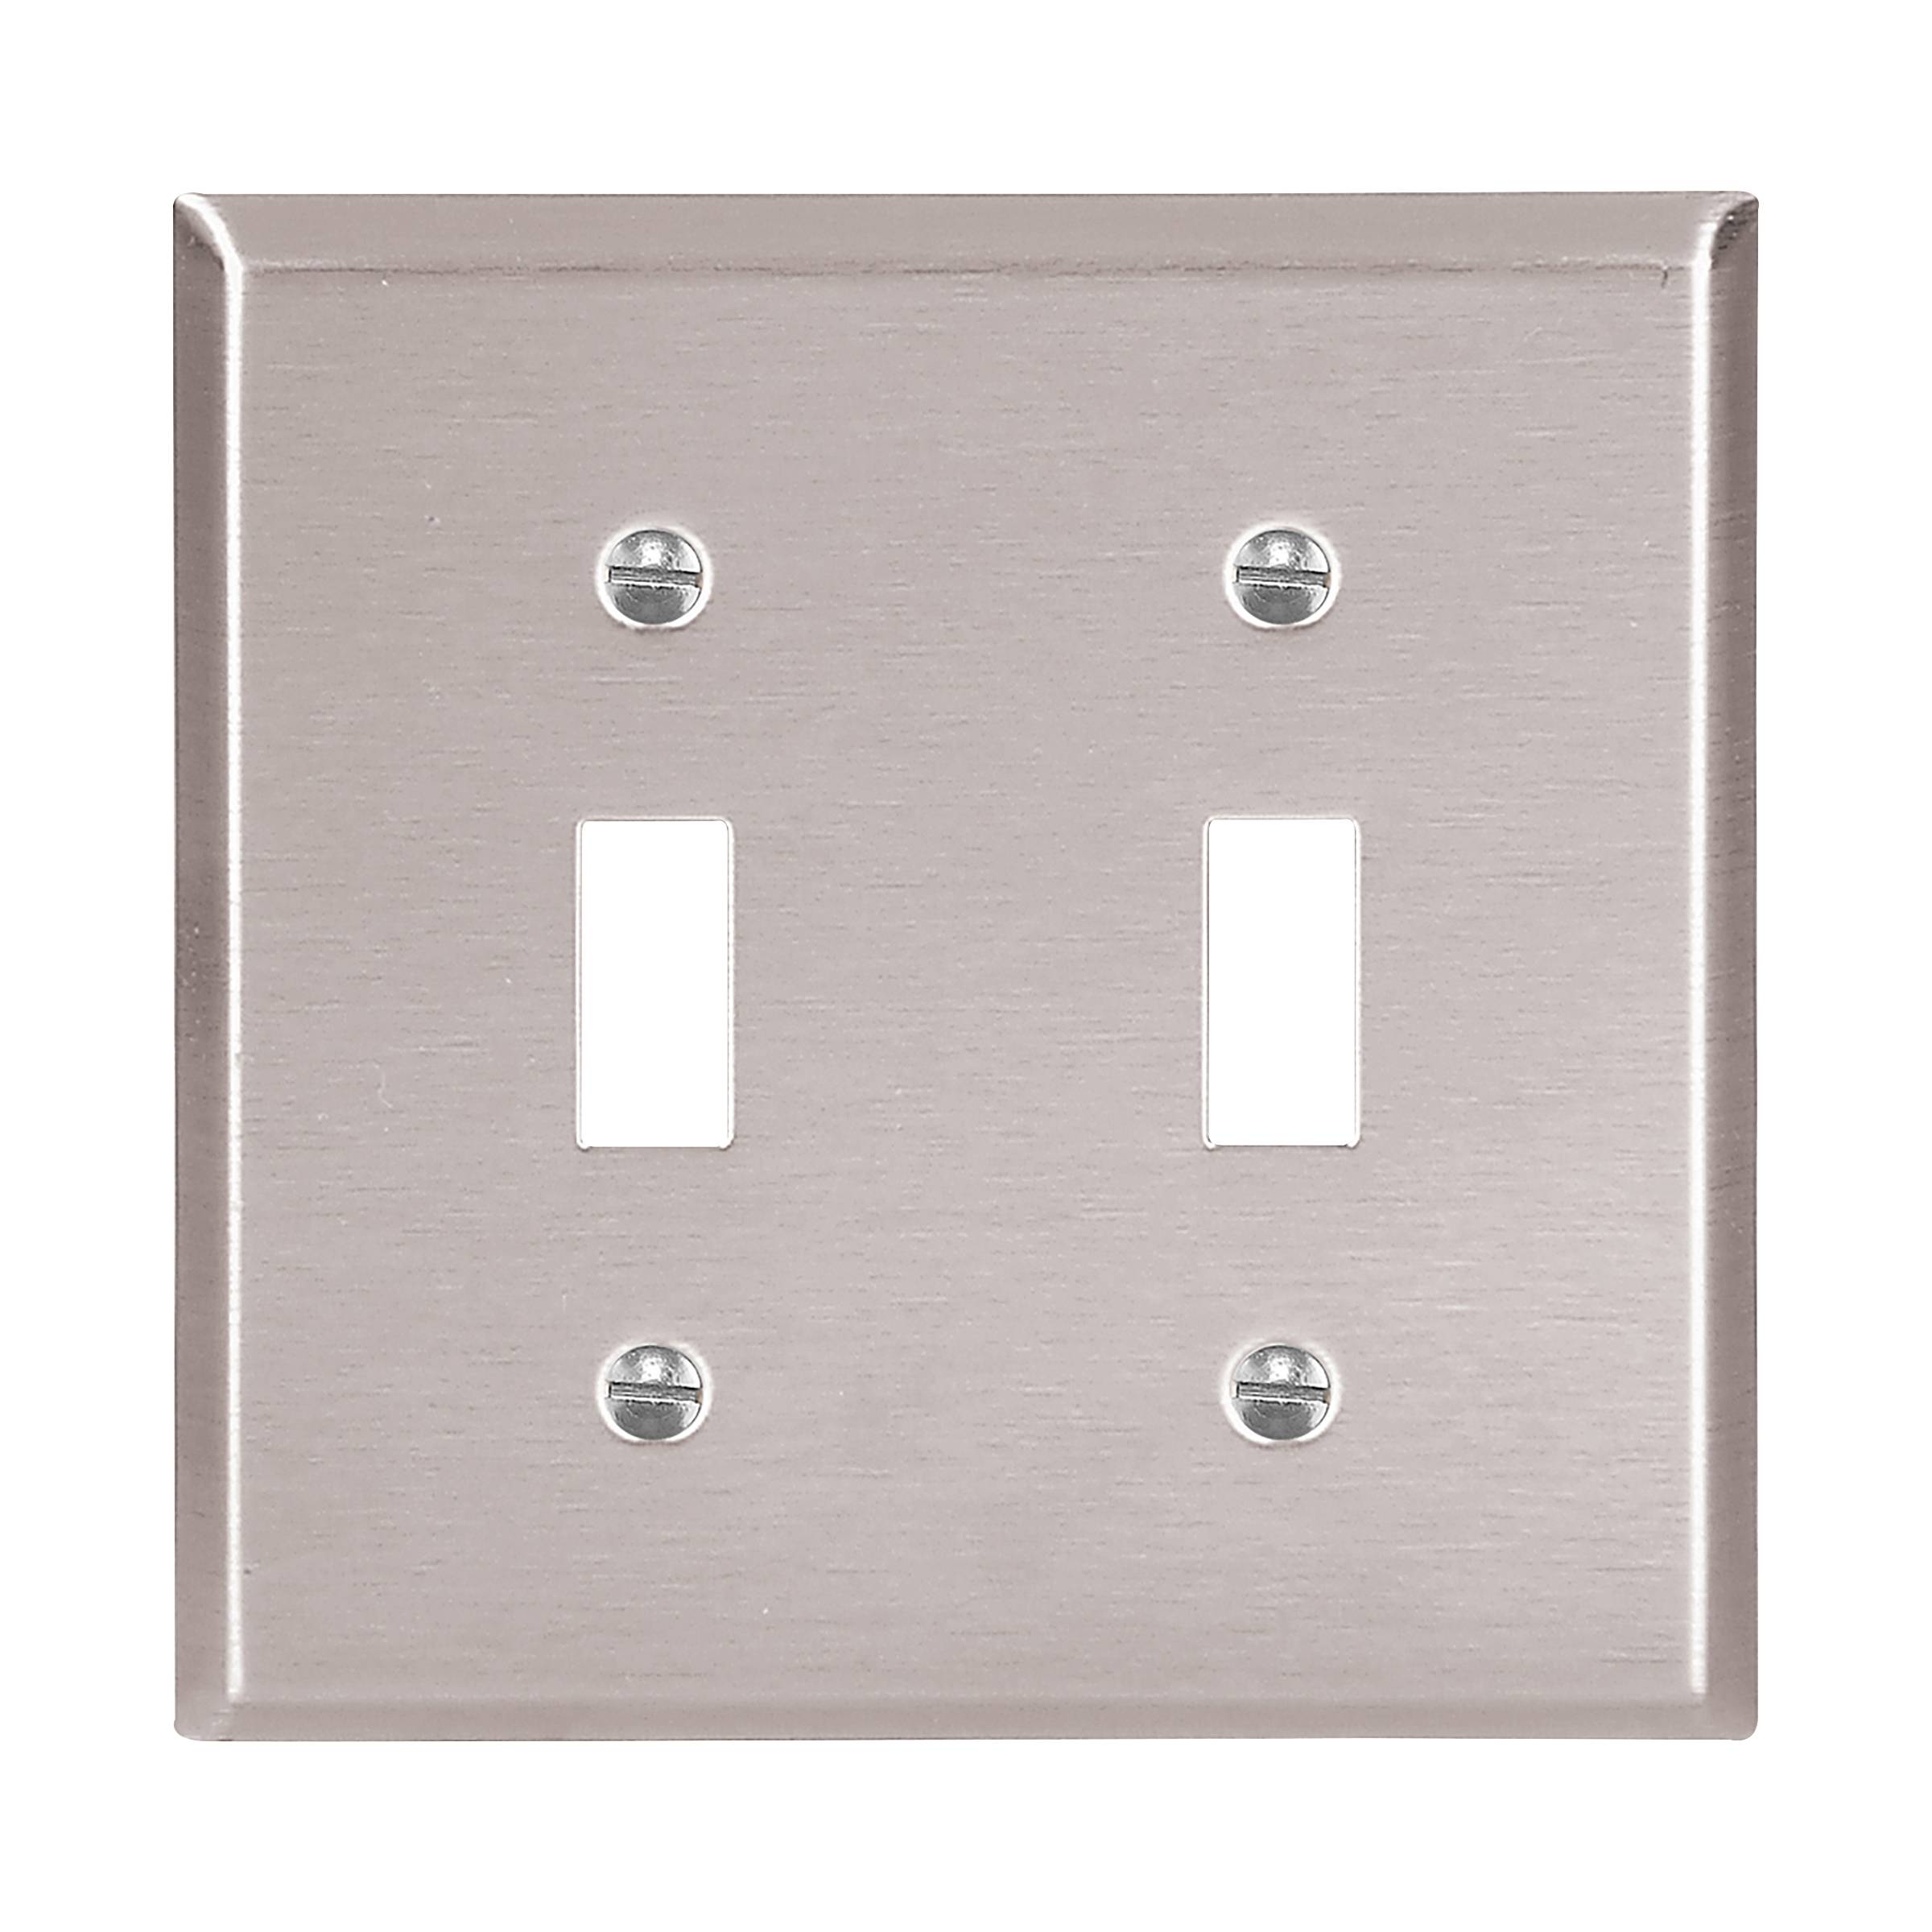 EATON Arrow Hart™ Eaton Wiring Devices 93072-SP-L 93000 Standard Toggle Switch Wallplate, 2 Gangs, 4.5 in H x 4.56 in W, 302/304 Stainless Steel, Clear